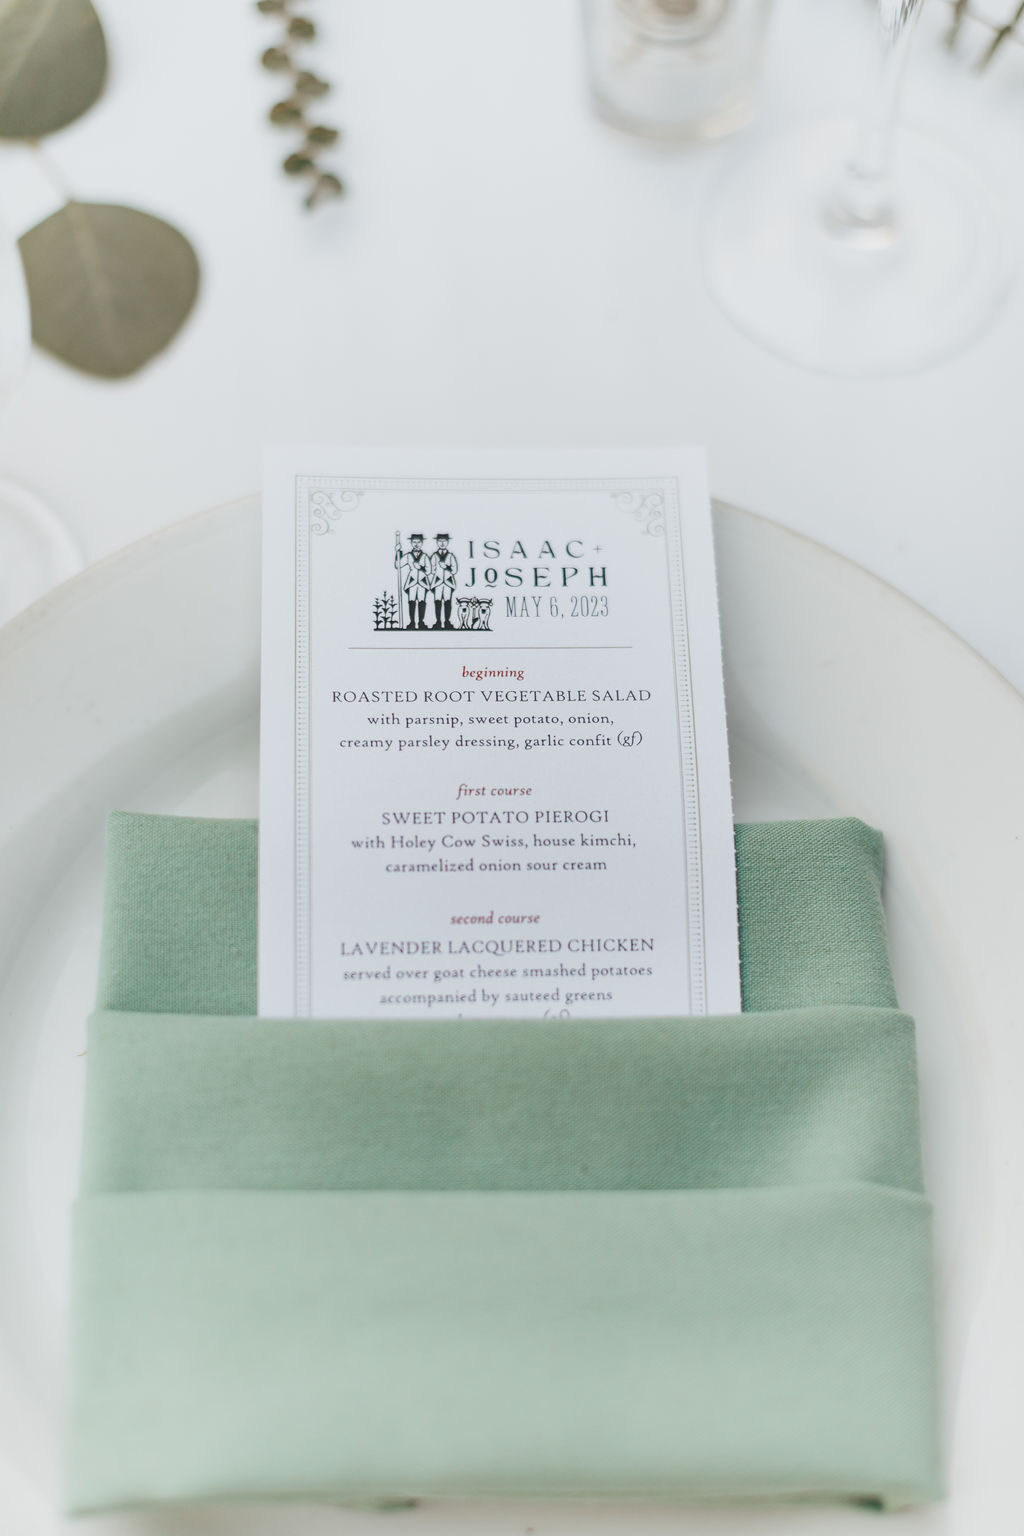 Dinner menu on table on top of white plate and green napkin.